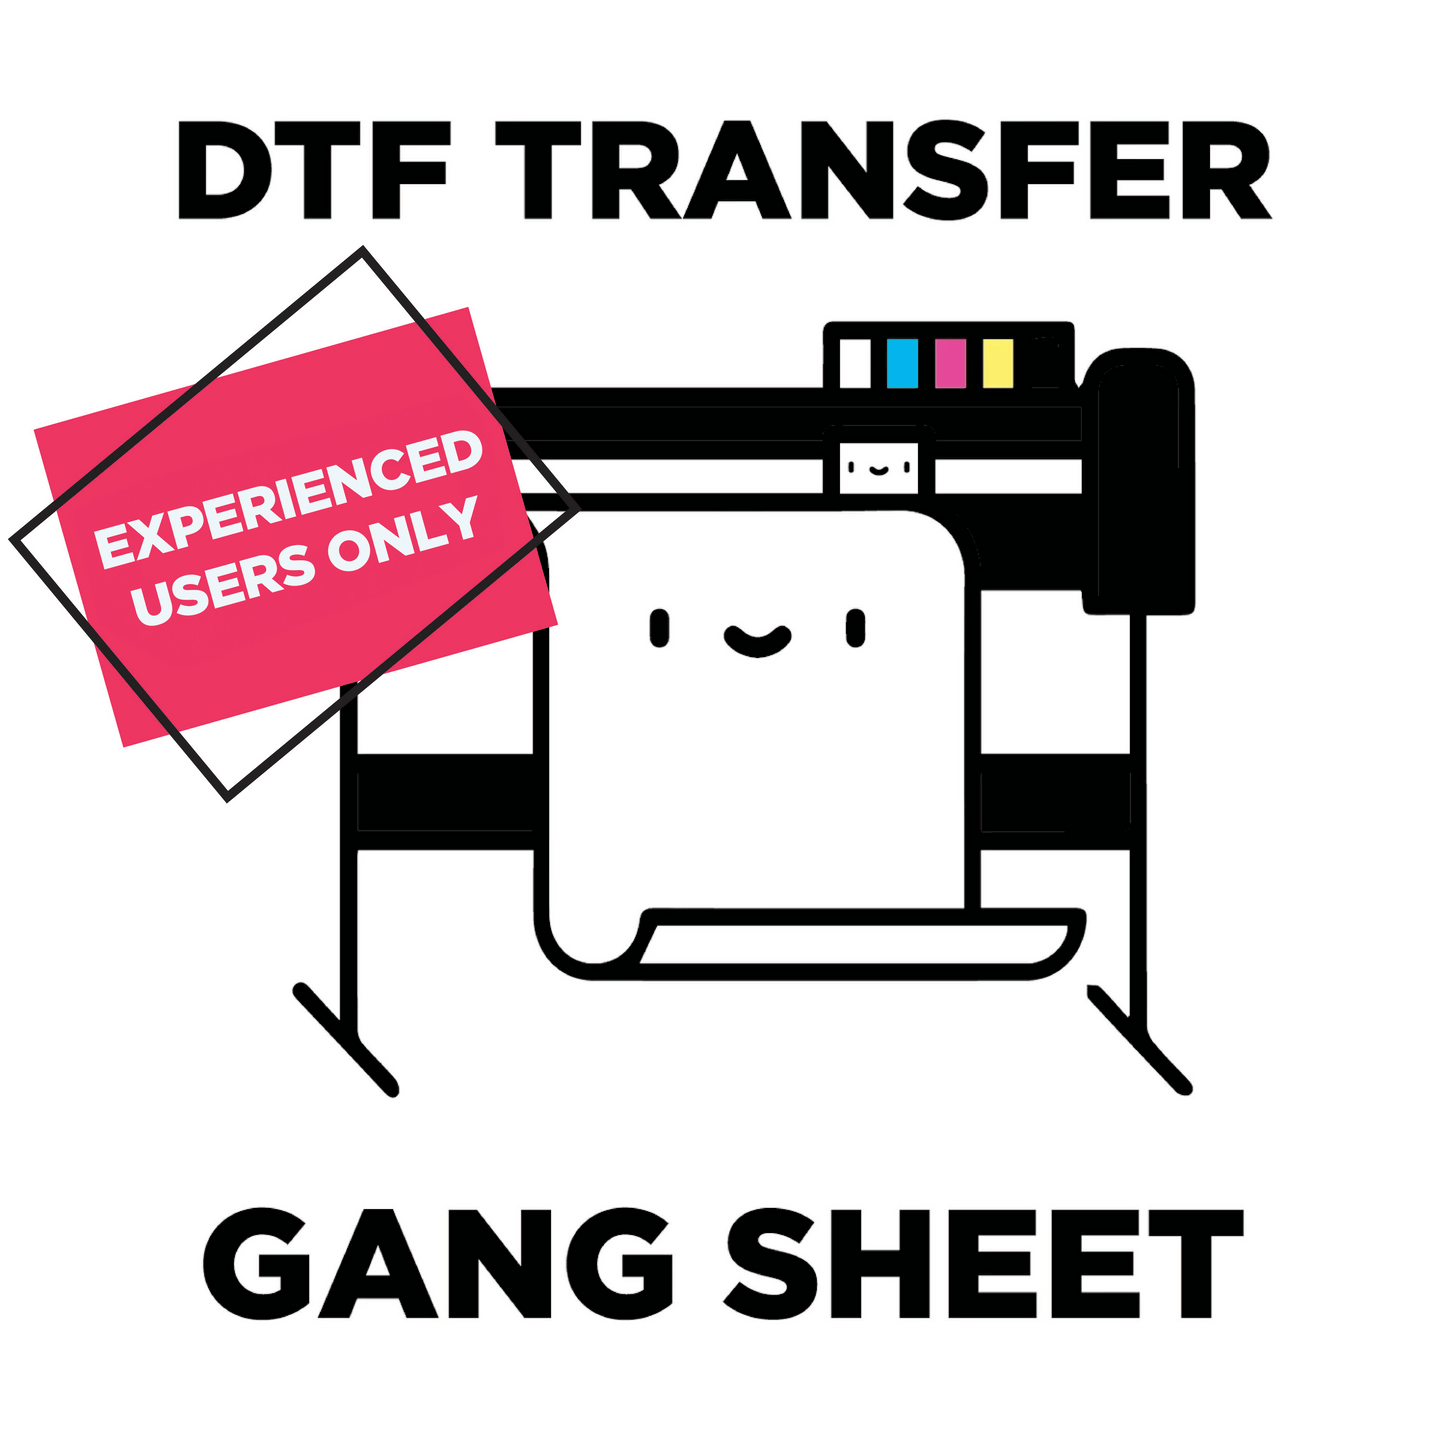 Gang Sheet - For Experienced Users Only